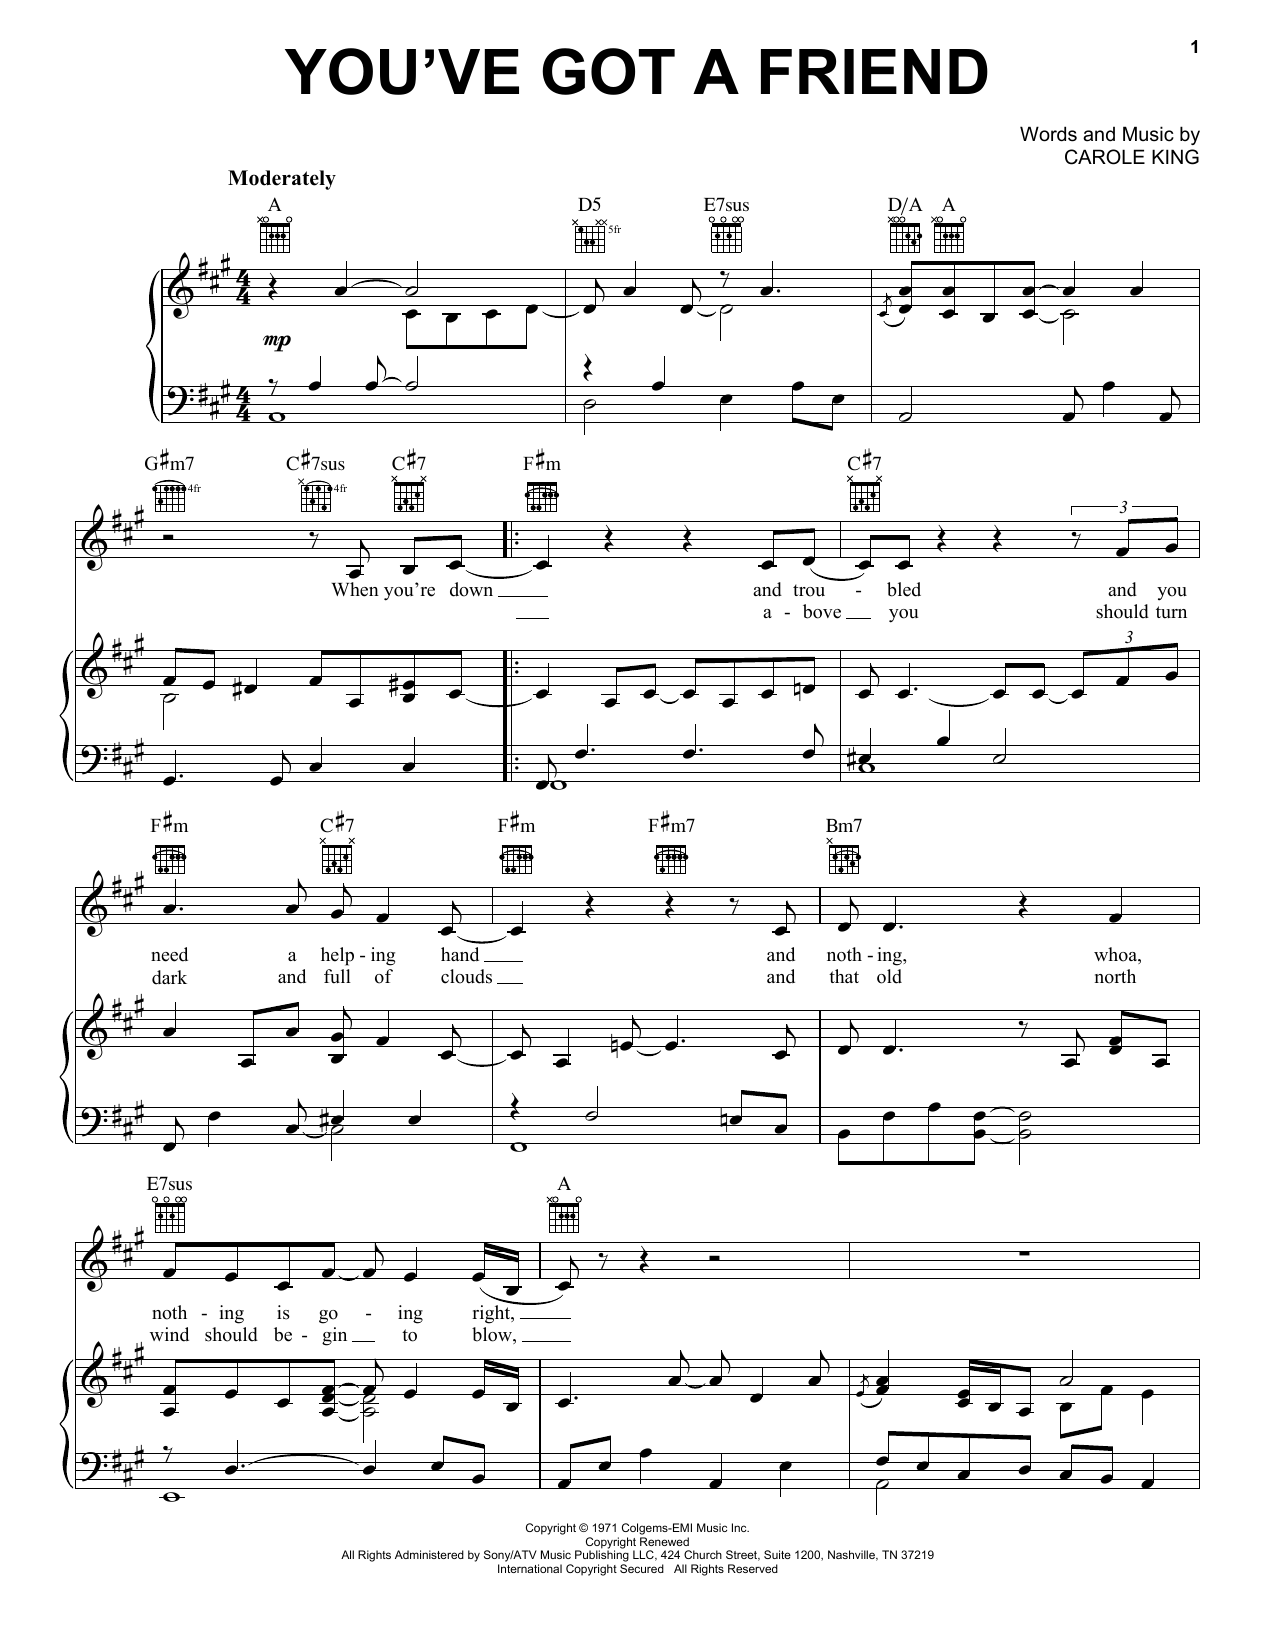 Carole King You've Got A Friend sheet music notes and chords. Download Printable PDF.